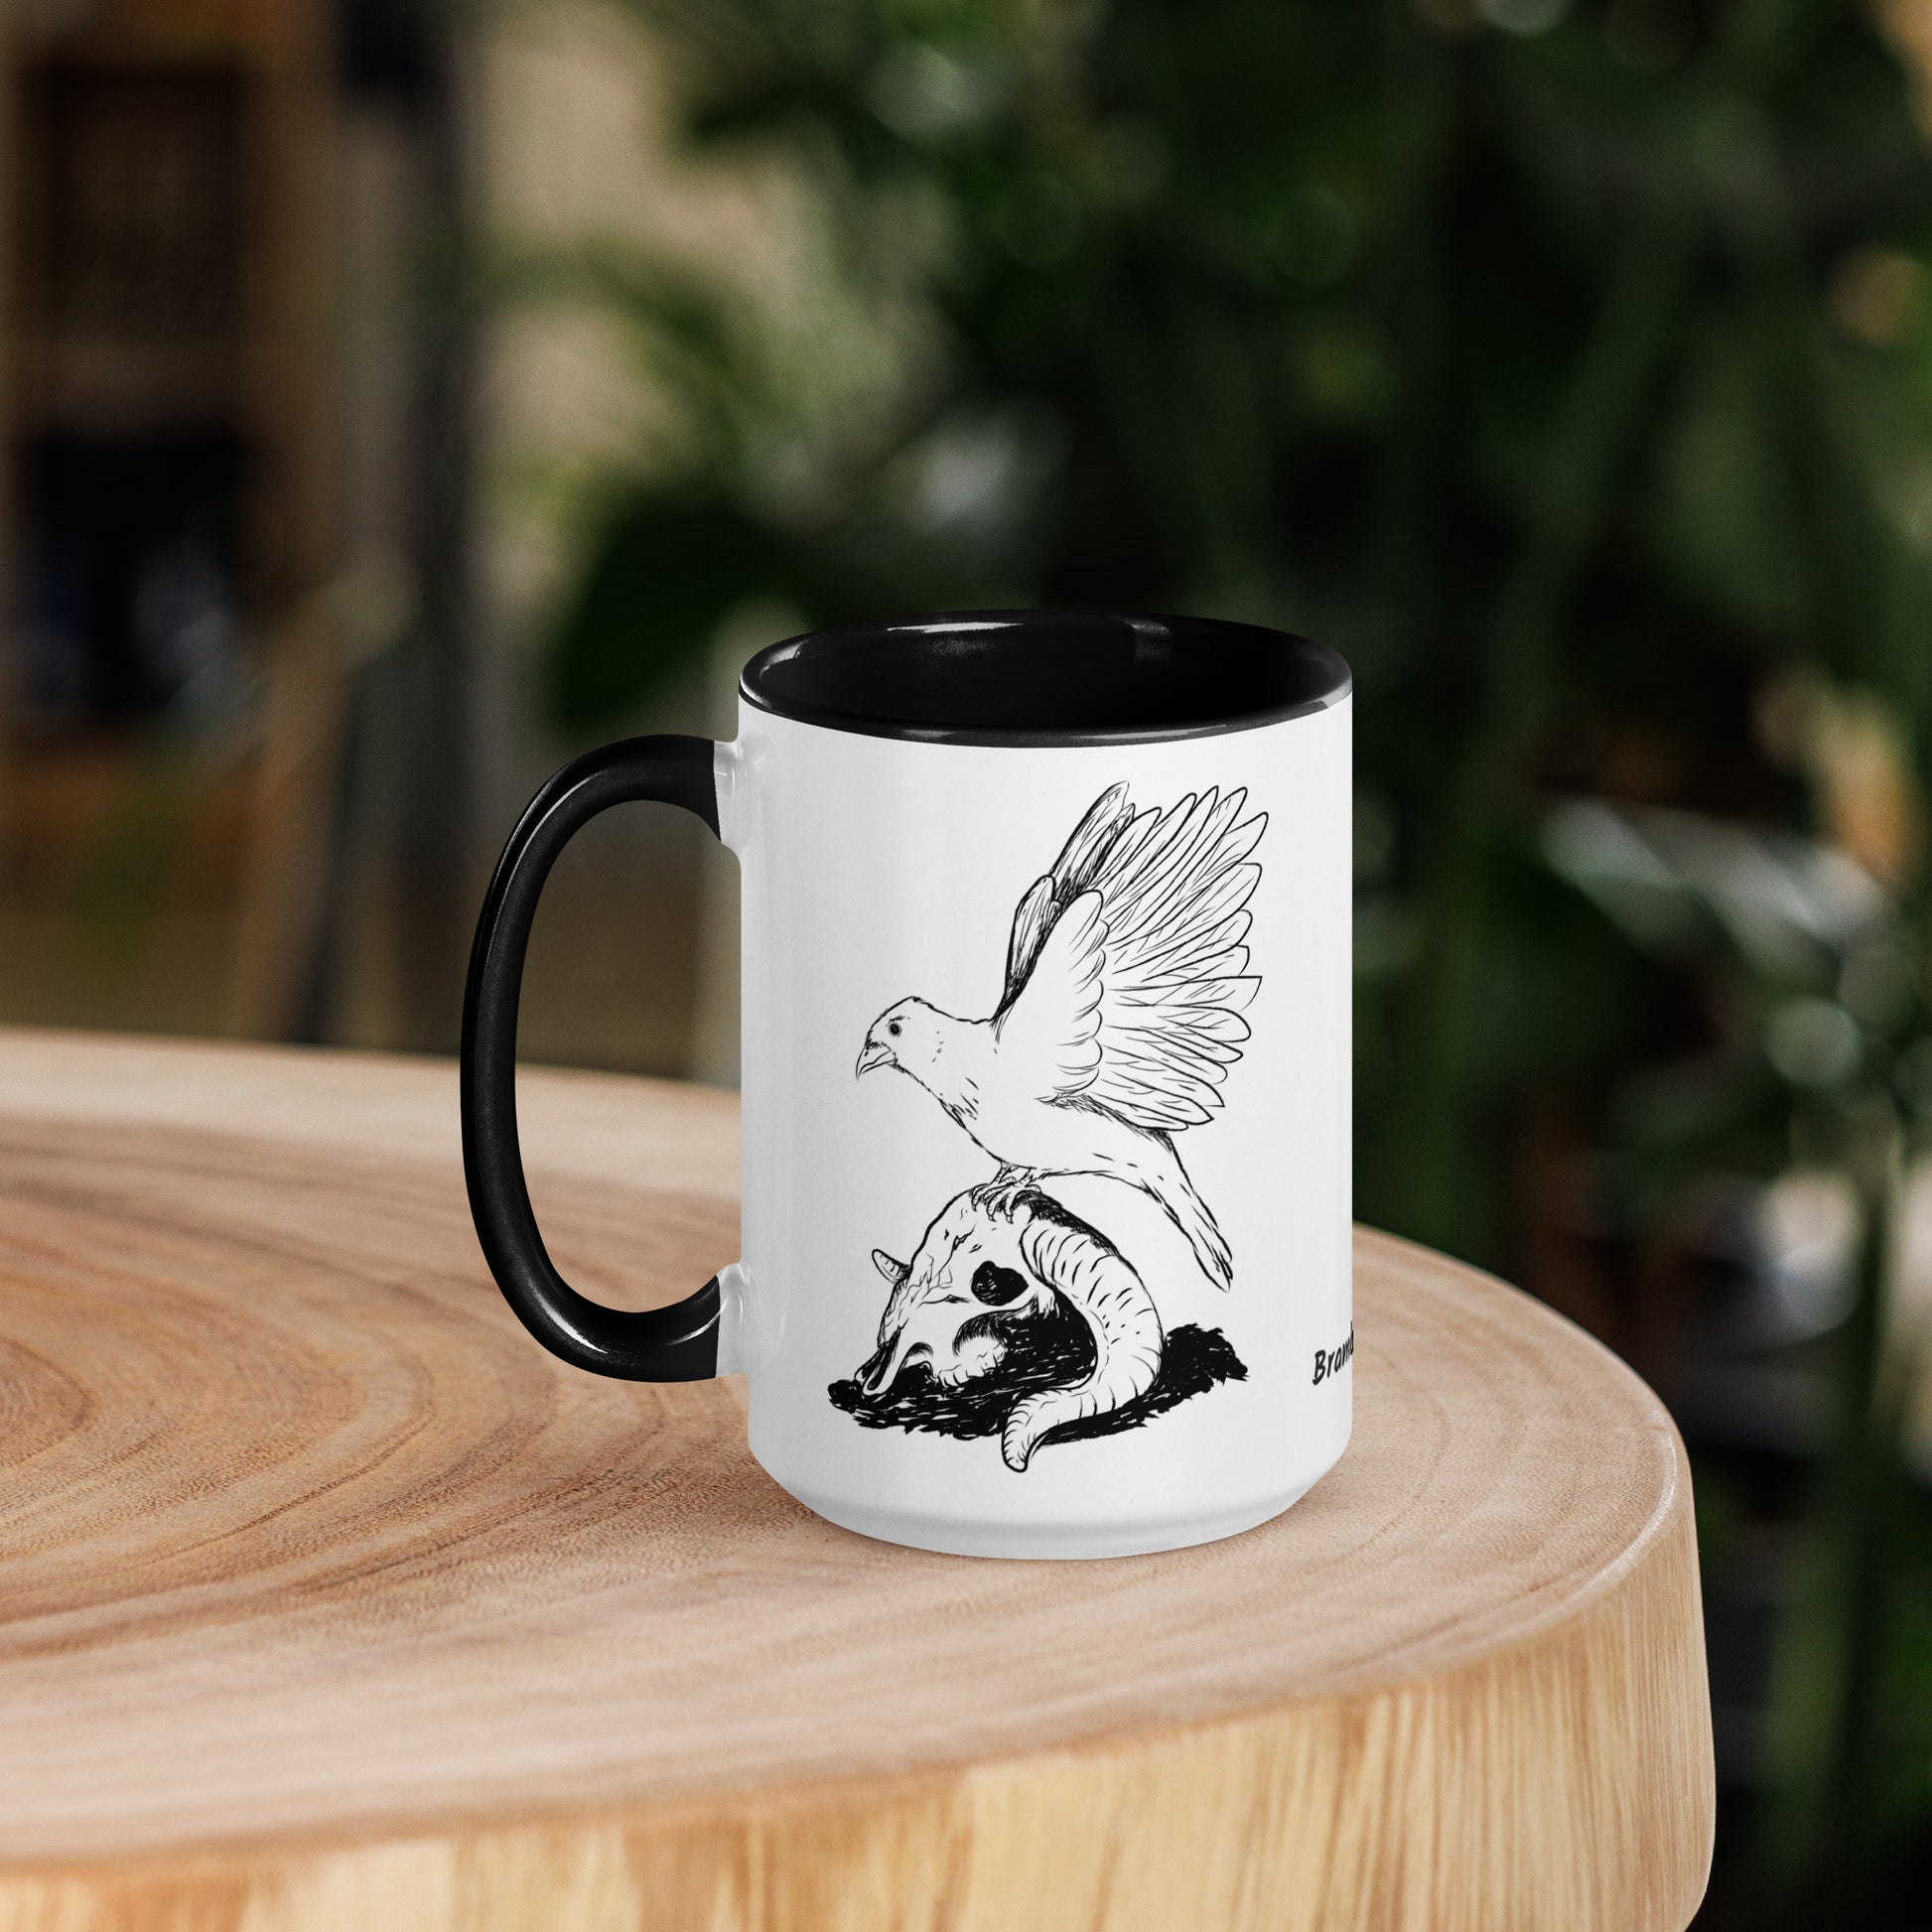 15 ounce white ceramic mug with black handle and inside. Features a double sided print of Reflections, a design with a crow sitting on a sheep skull. Dishwasher and microwave safe. Shown on wooden tabletop.